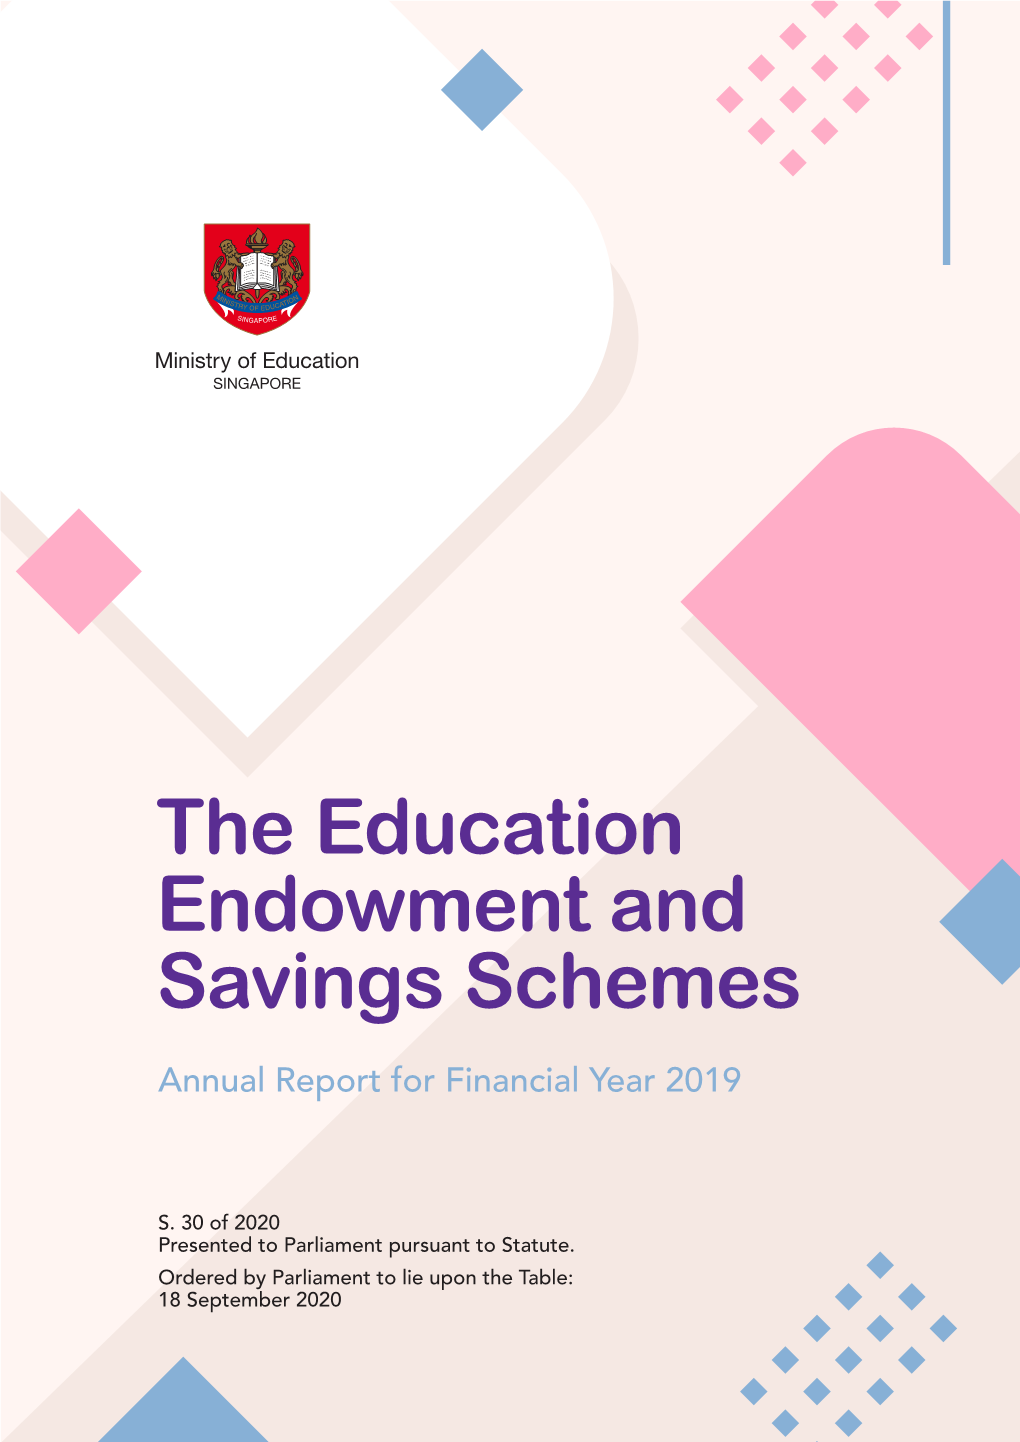 The Education Endowment and Savings Schemes